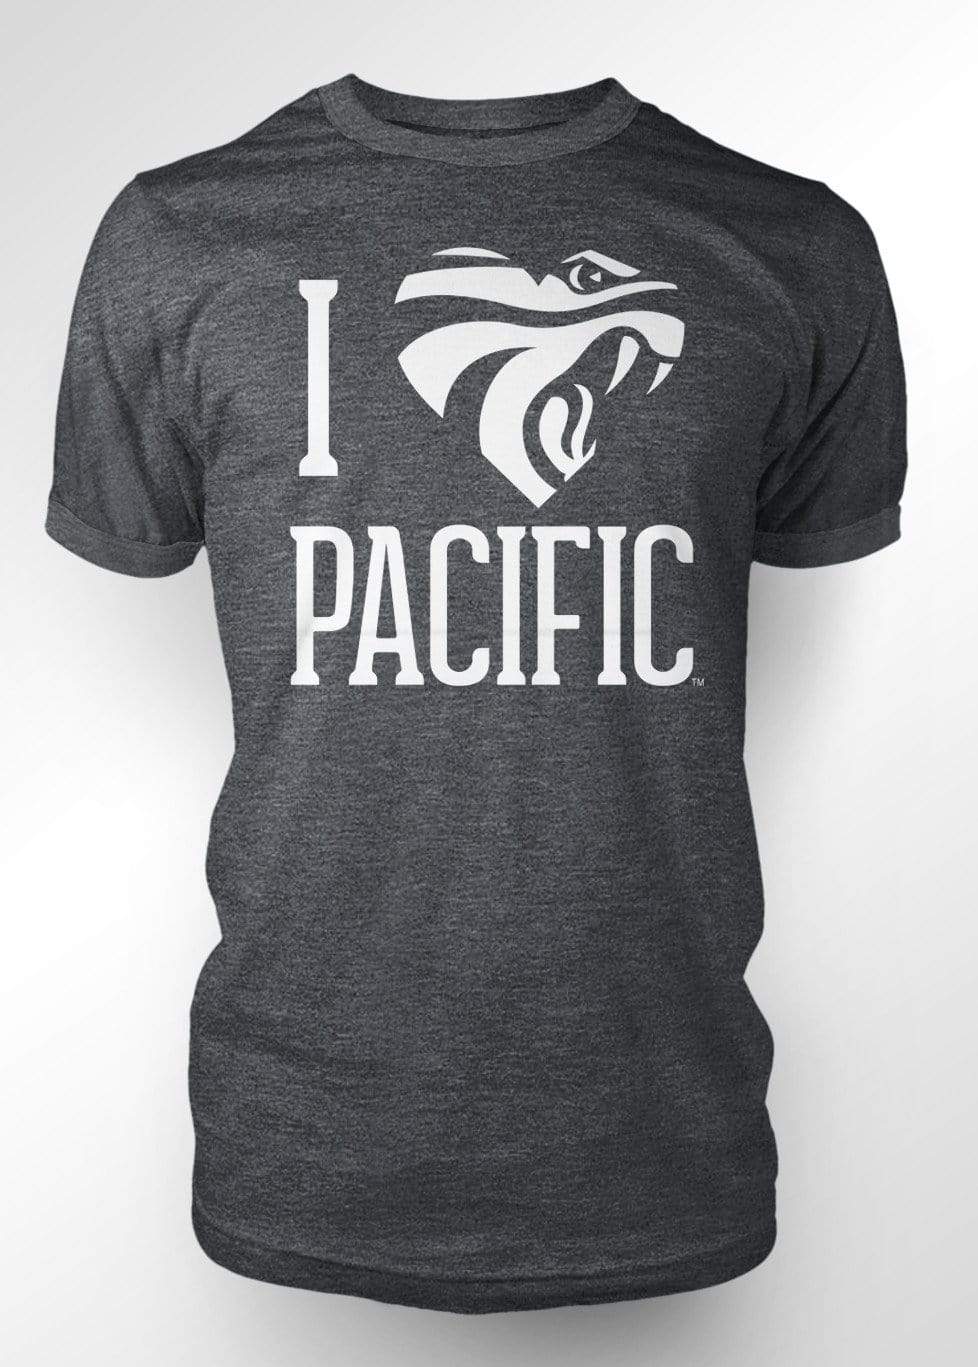 University of the Pacific Tigers I Love Pacific: Powercat T-shirt by Zeus Collegiate